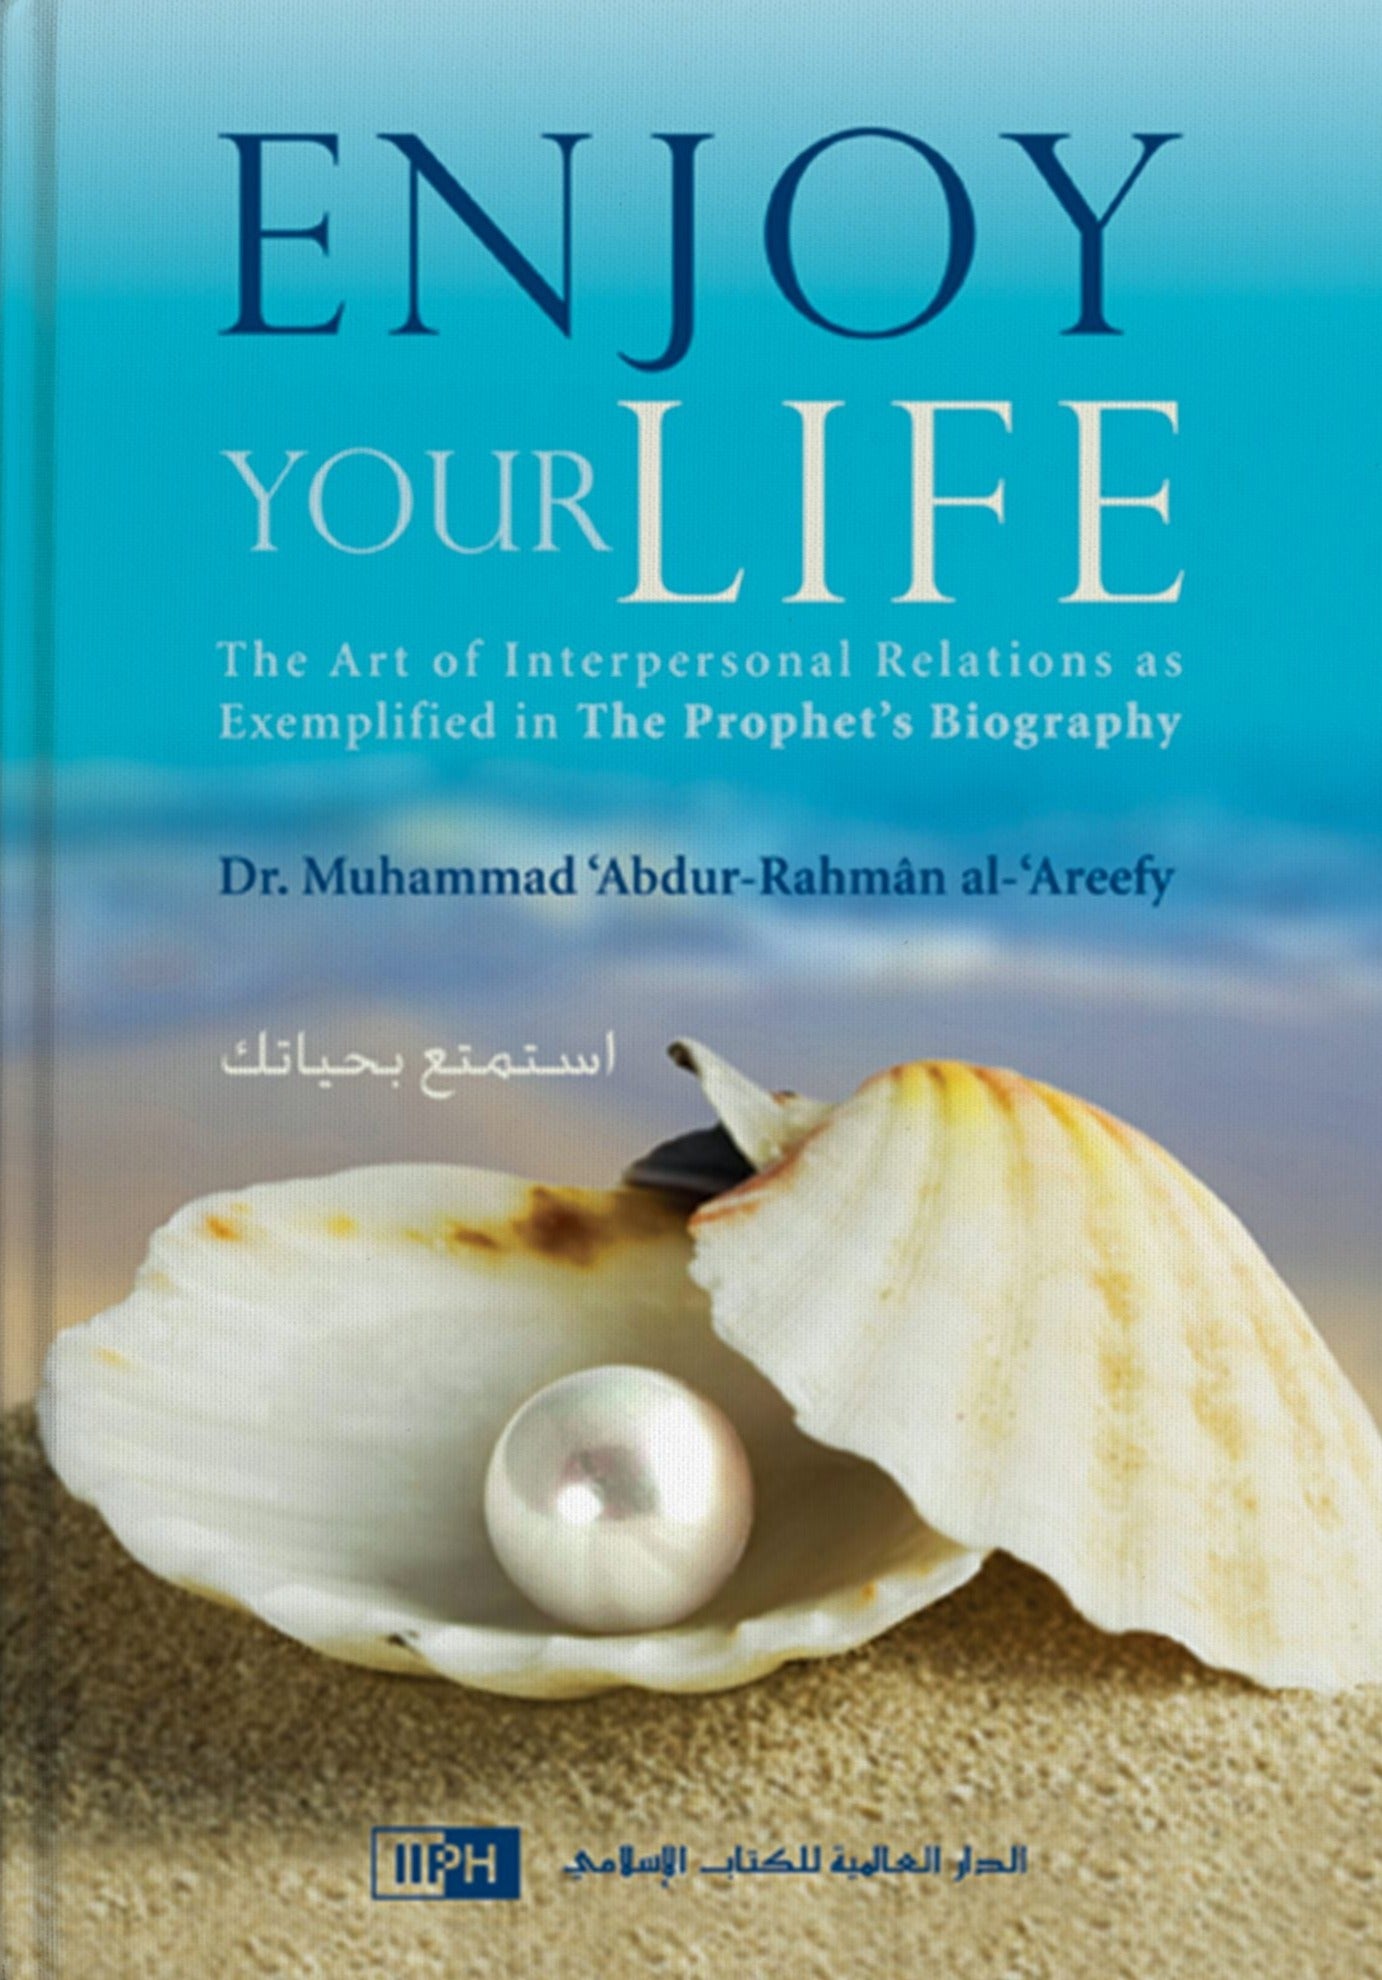 Enjoy Your Life: The Art of Interpersonal Relations as Exemplified in the Prophet's Biography